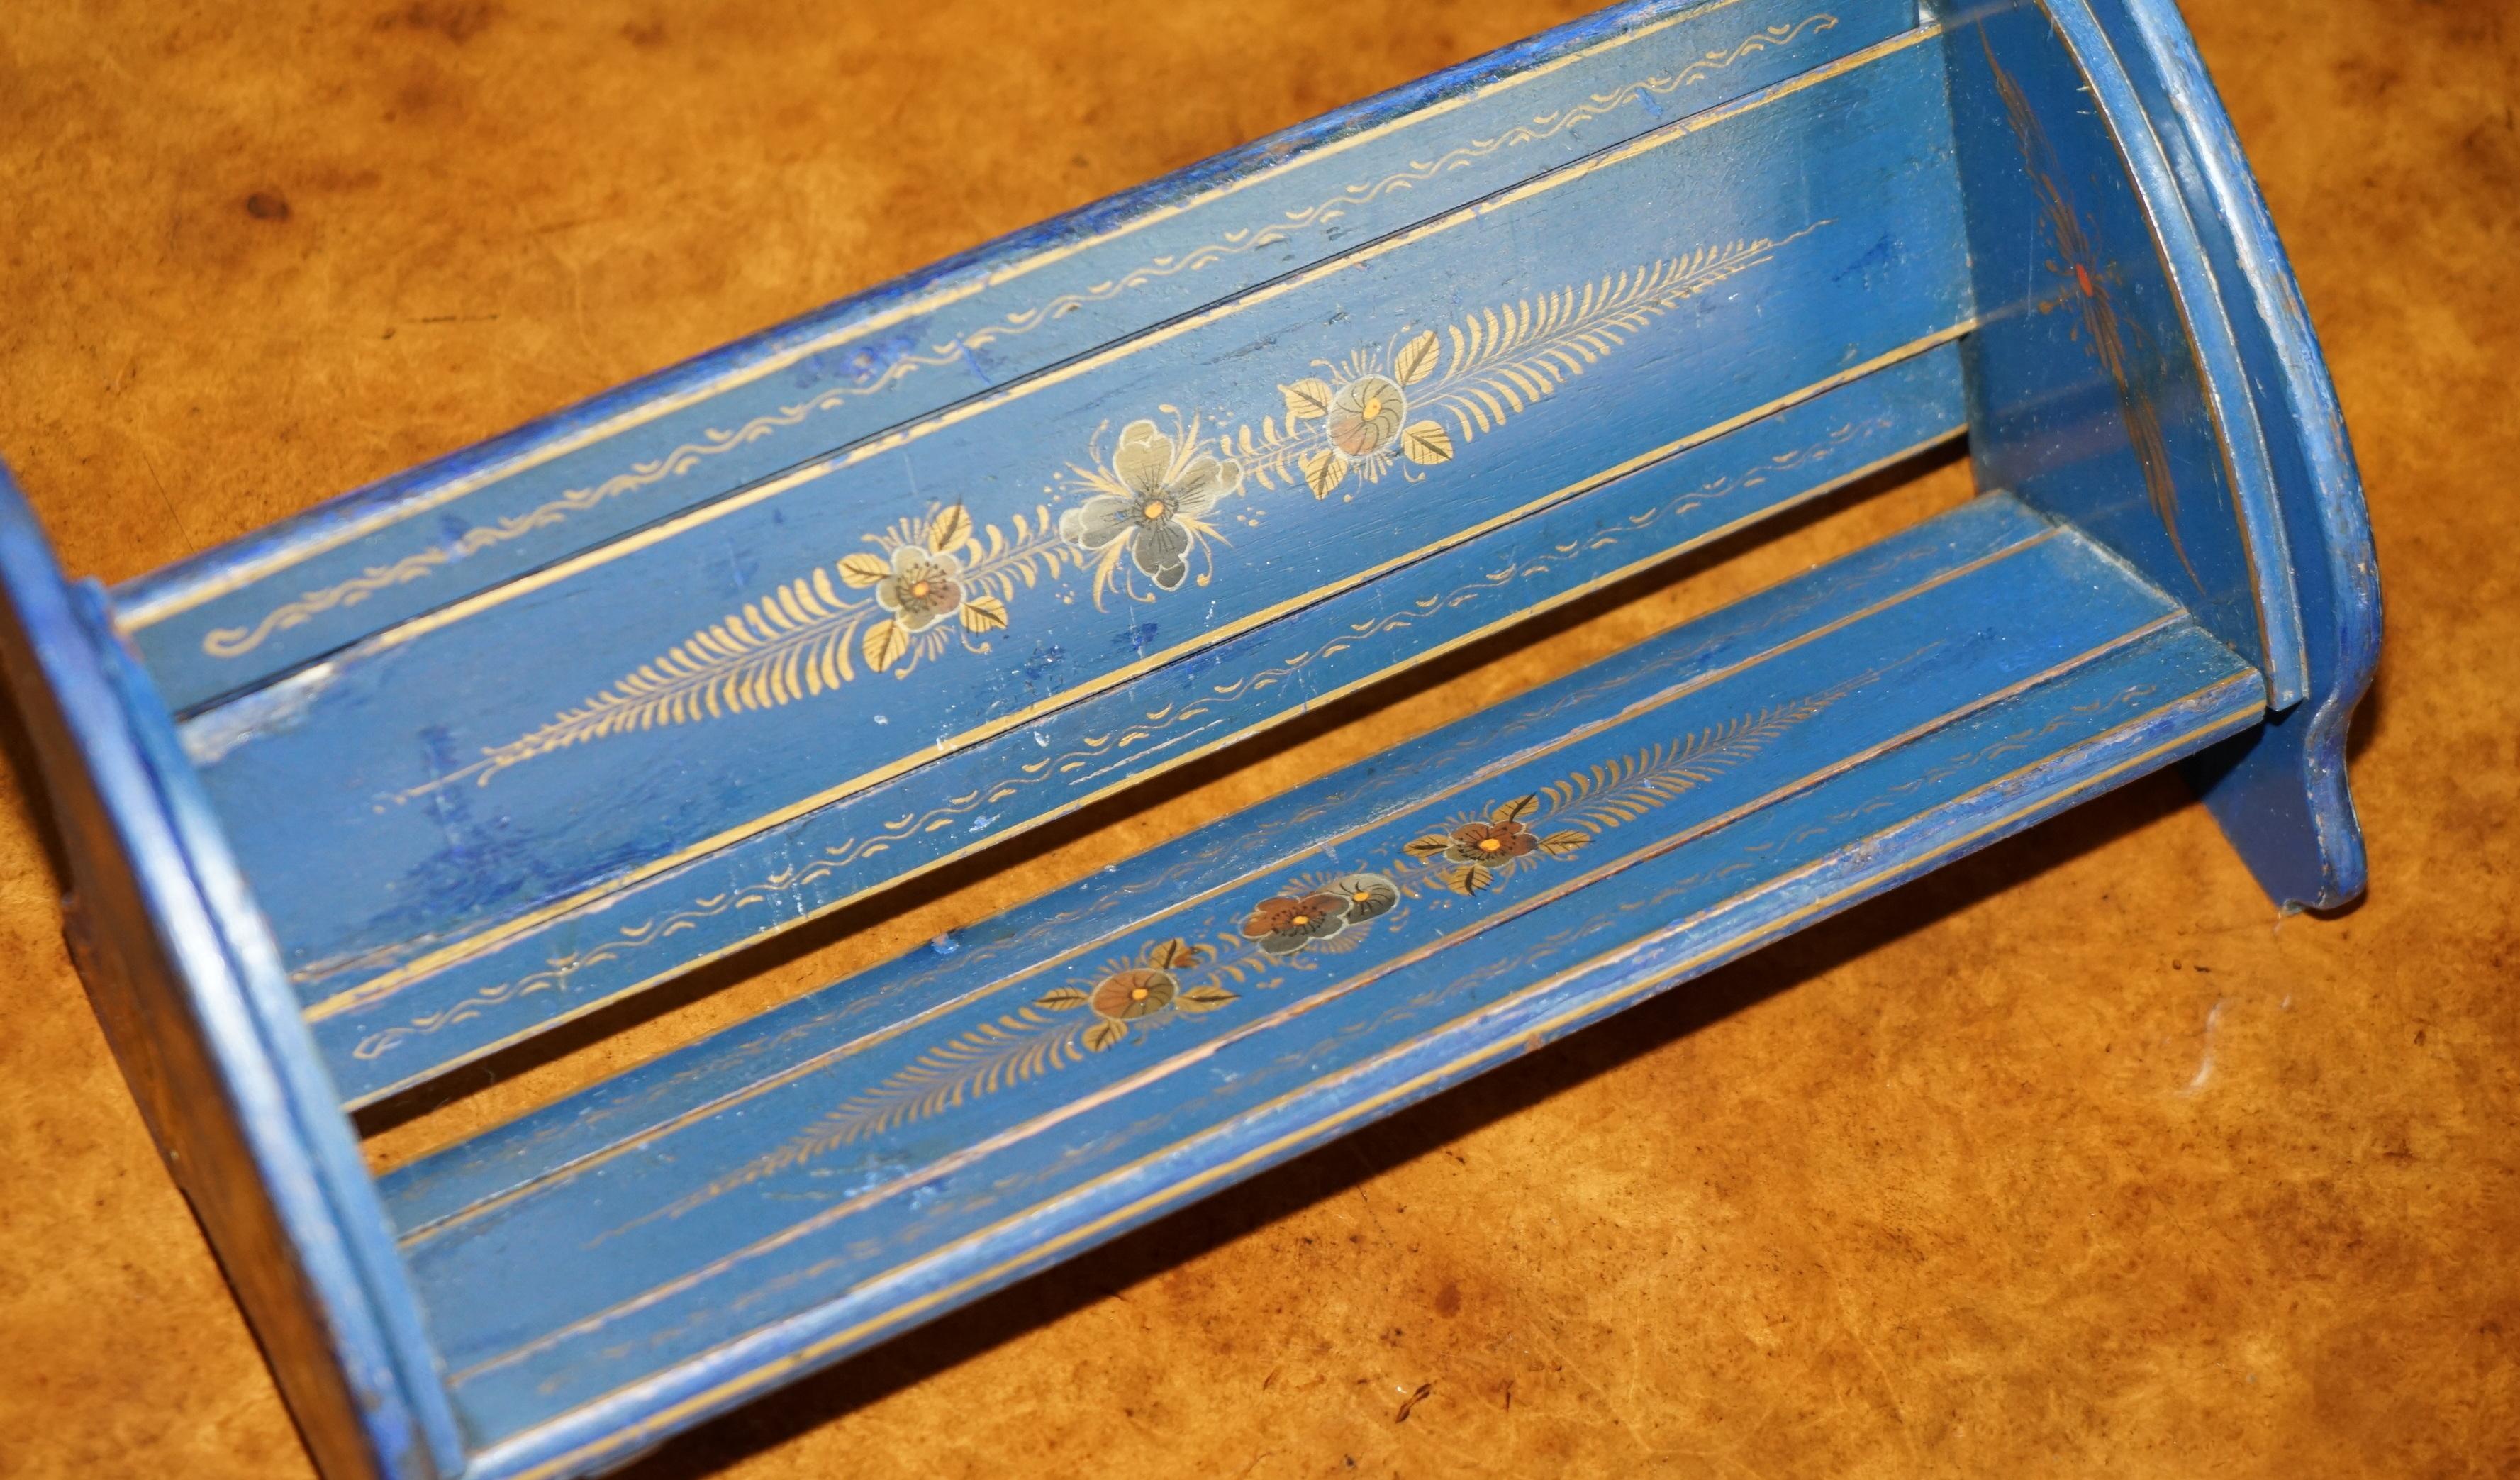 ANTIQUE CIRCA 1920er Jahre SMALL CHiNESE CHINOISERIE BOOKSHELF TABLE TOP BOOK STAND (Chinoiserie) im Angebot